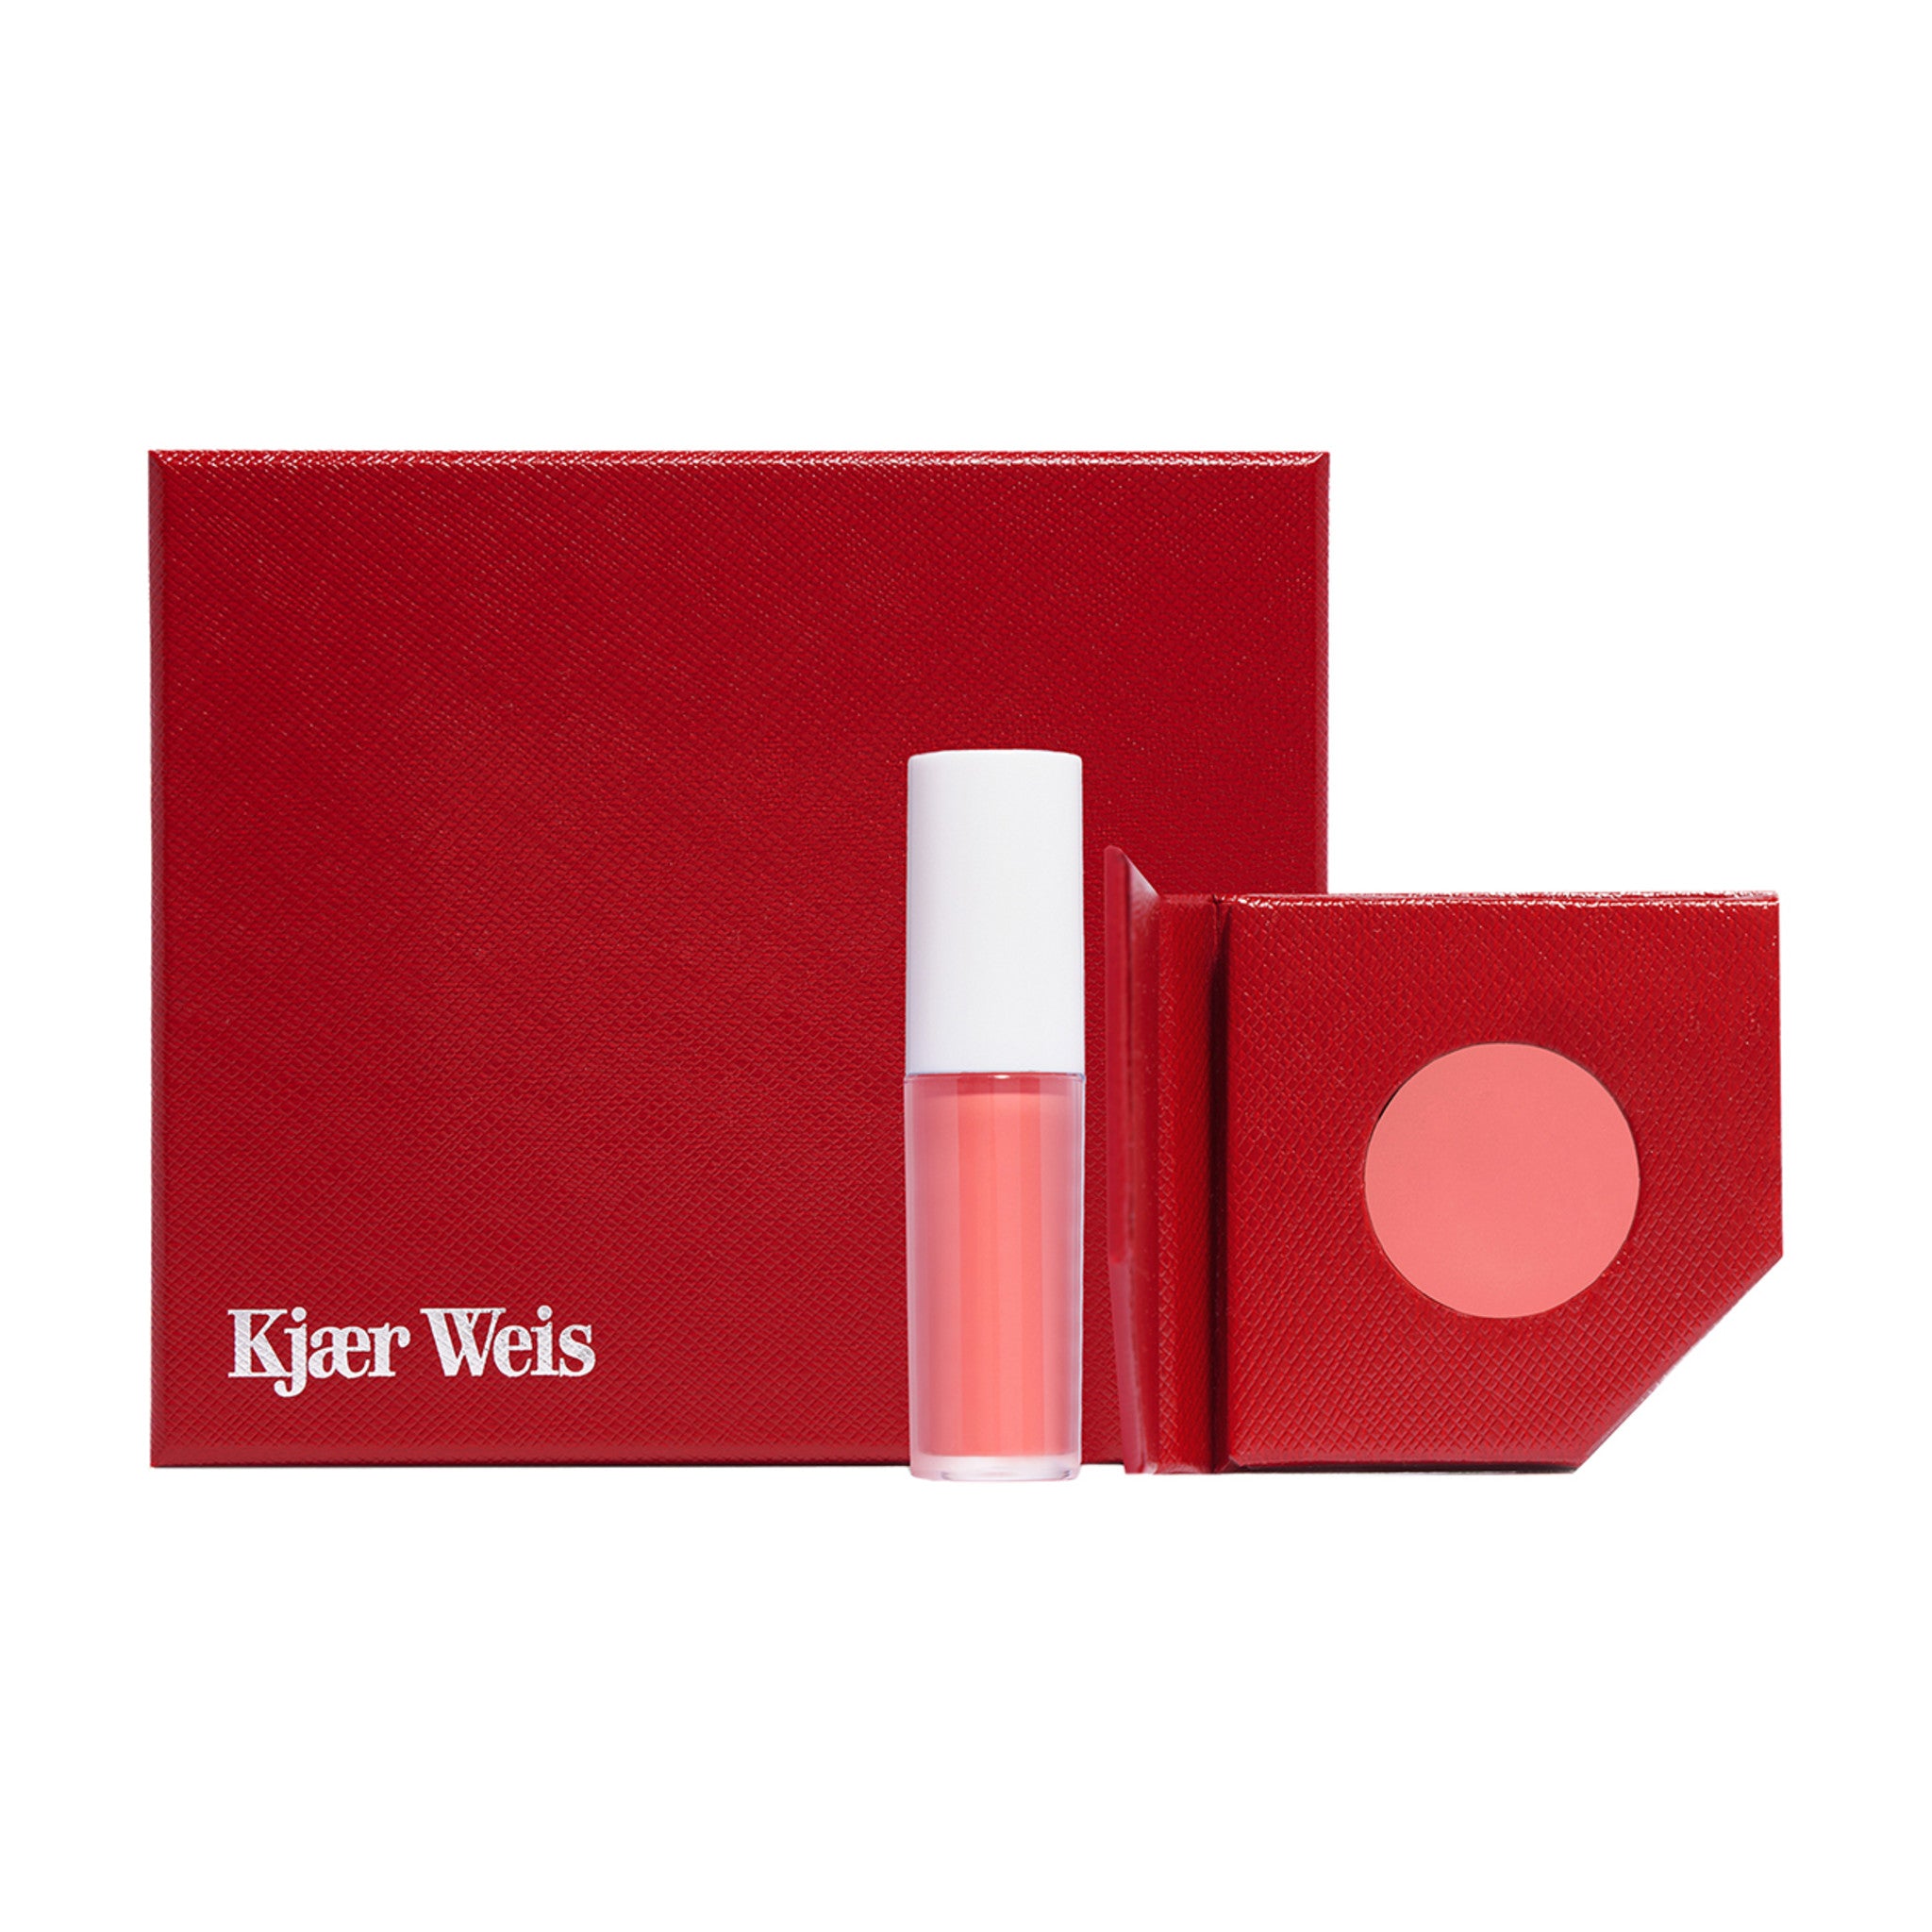 Kjaer Weis A Touch of KW – bluemercury